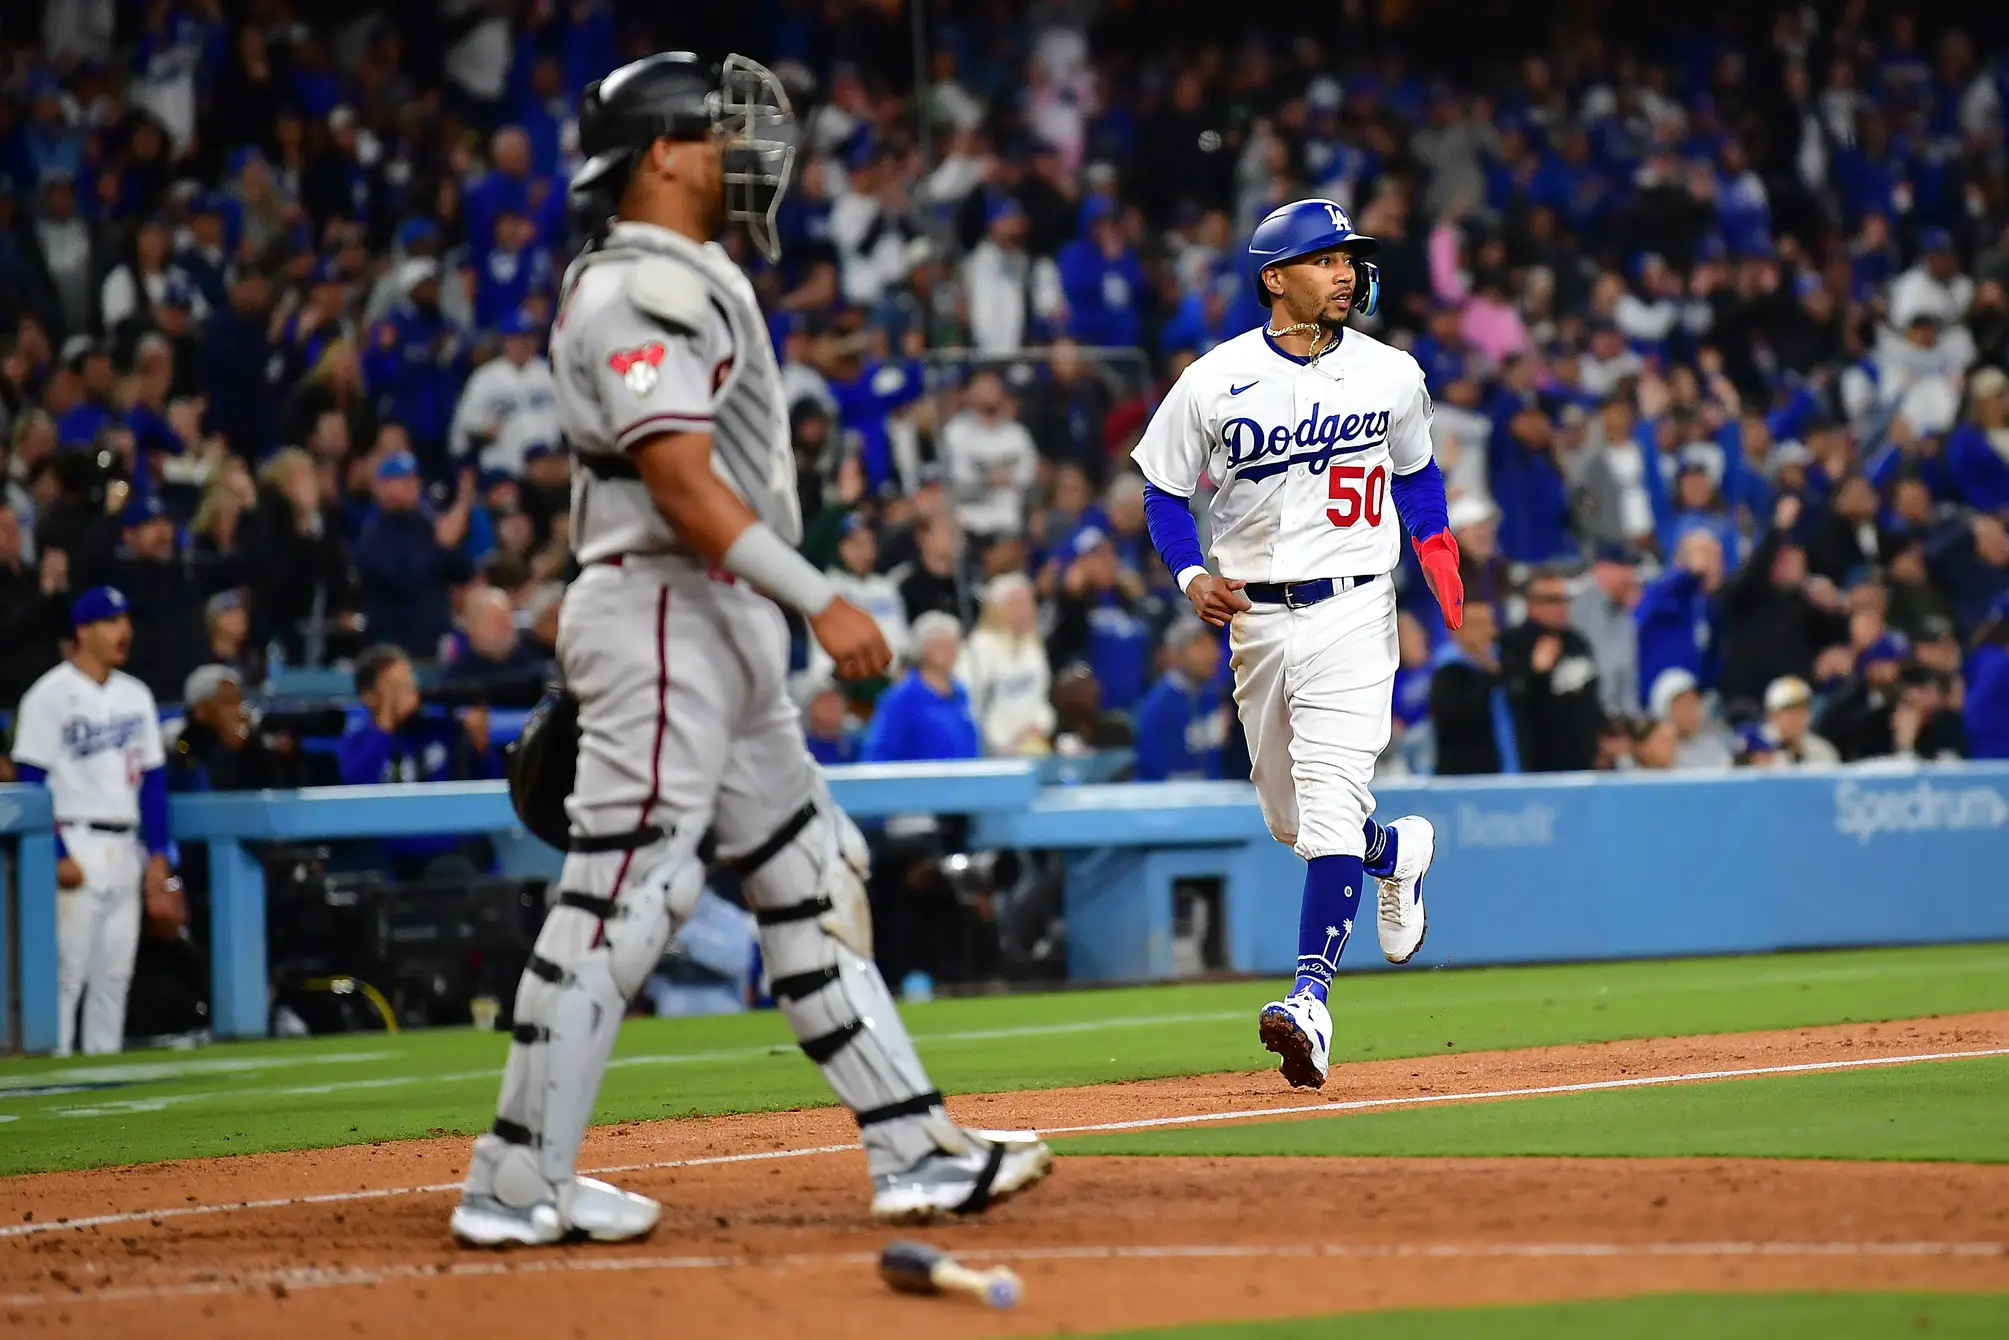 Dodgers vs Diamondbacks: Friday’s Game 2 Lineups, Notes, How to Watch and More